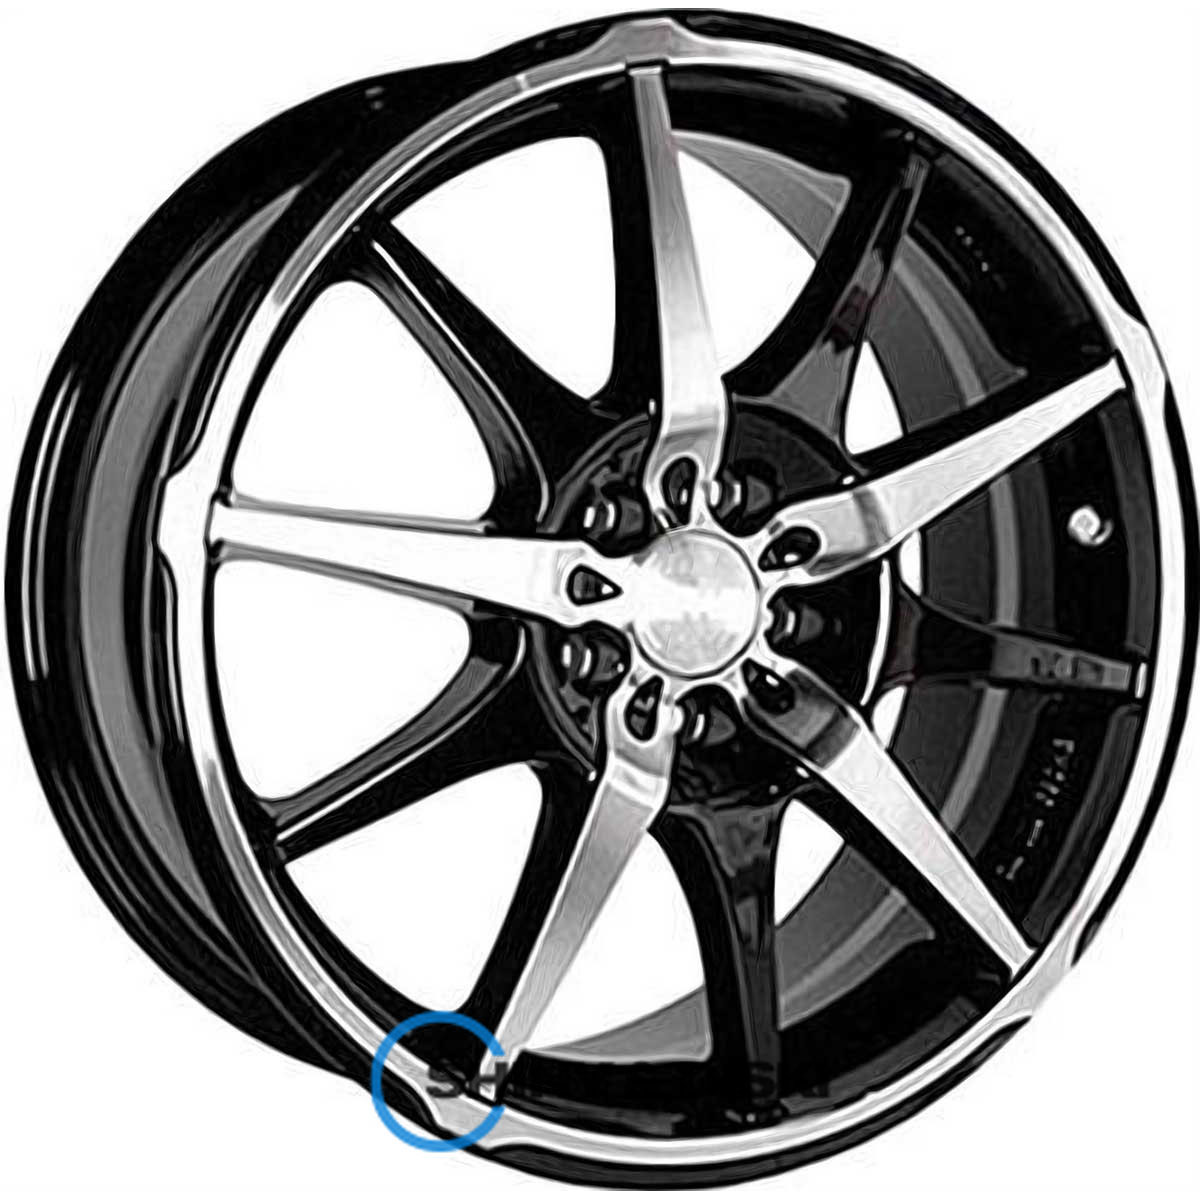 rs tuning h-415 bkfp r16 w7 pcd5x114.3 et40 dia67.1